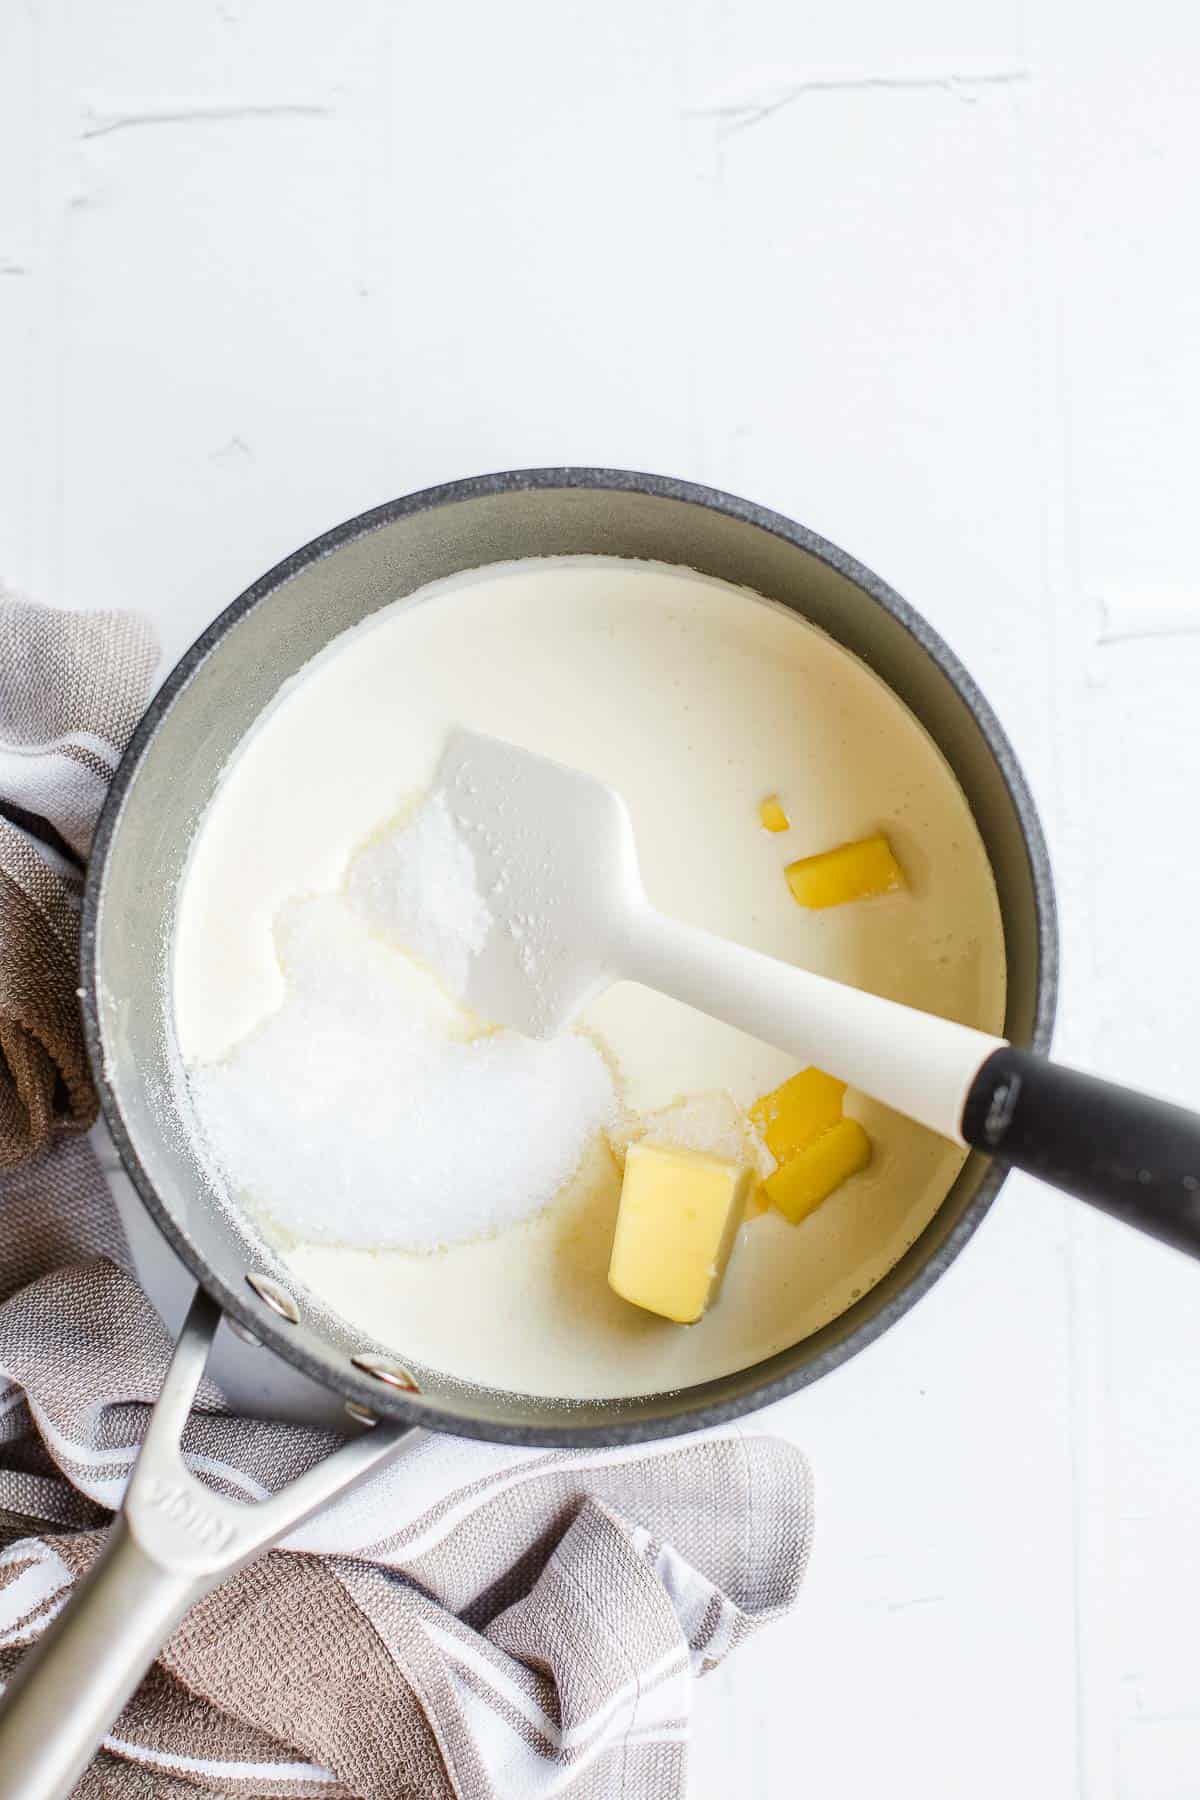 Cream butter and sweetener in a small saucepan with a white spatula.